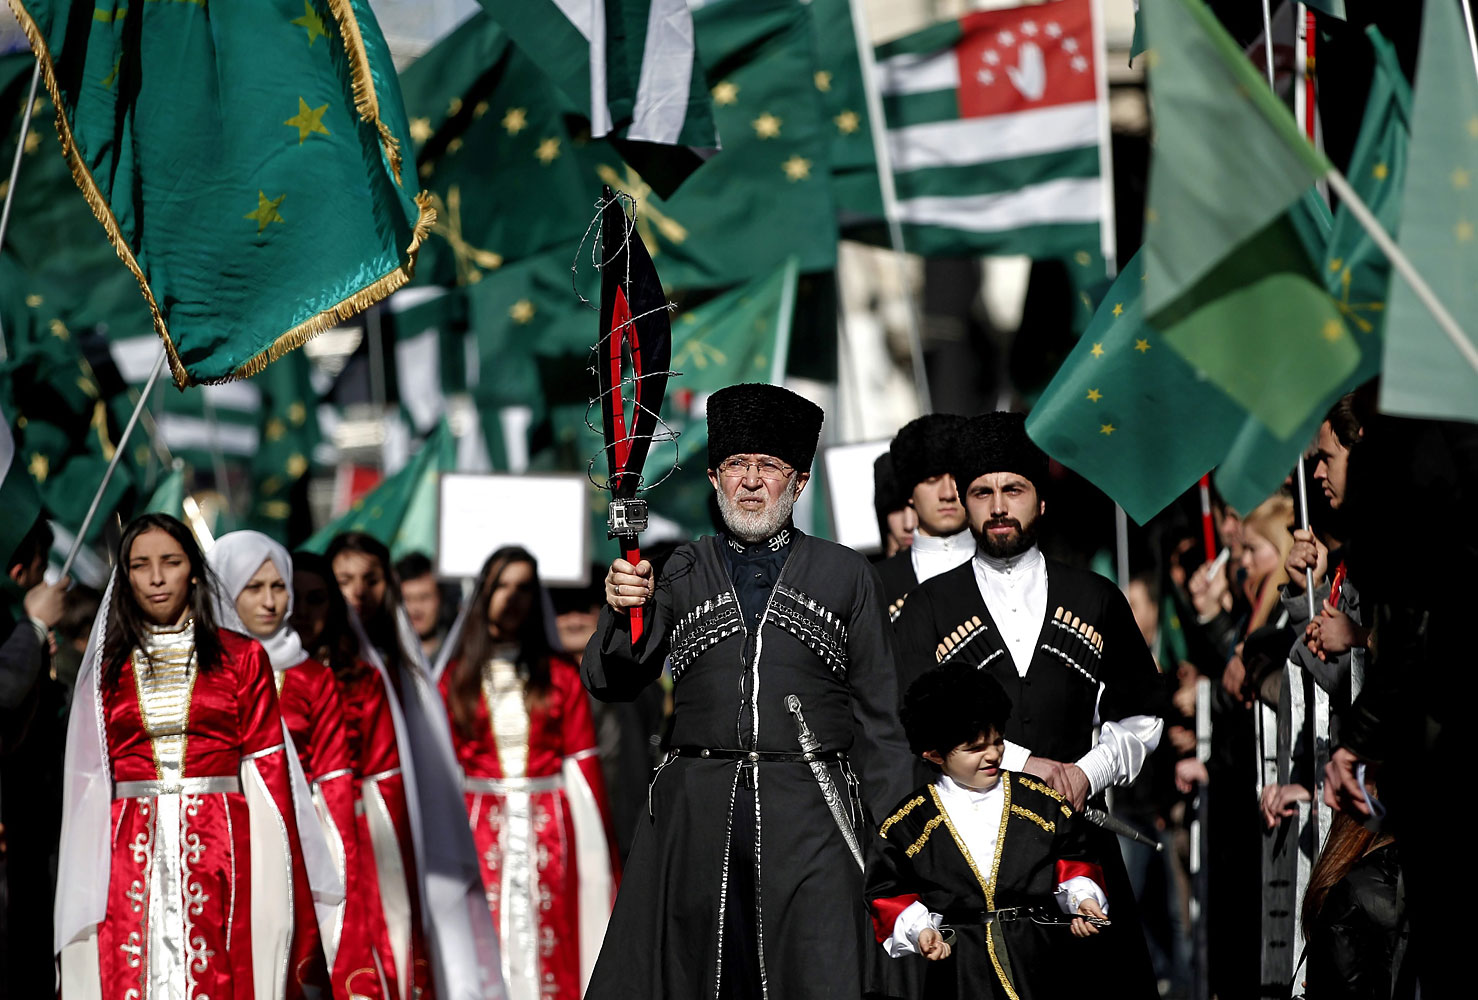 Members of a Circassian ethnic group shout slogans during a protest against the Olympics in front of the Russian Consulate in Istanbul, Feb. 2, 2014. (Sedat Suna / EPA)